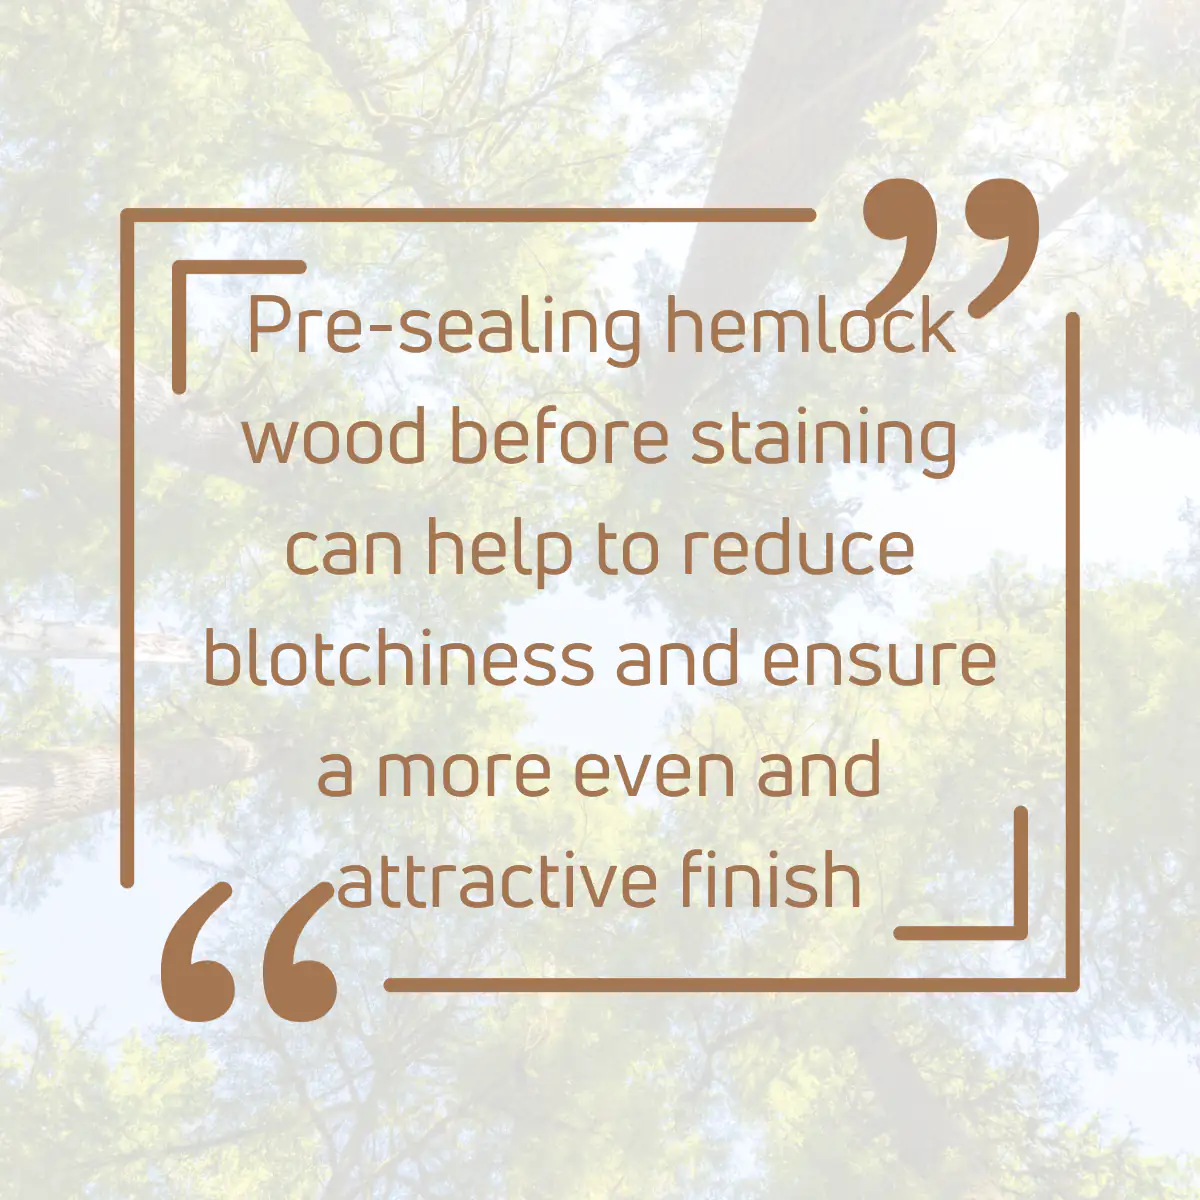 Tip for working with Hemlock